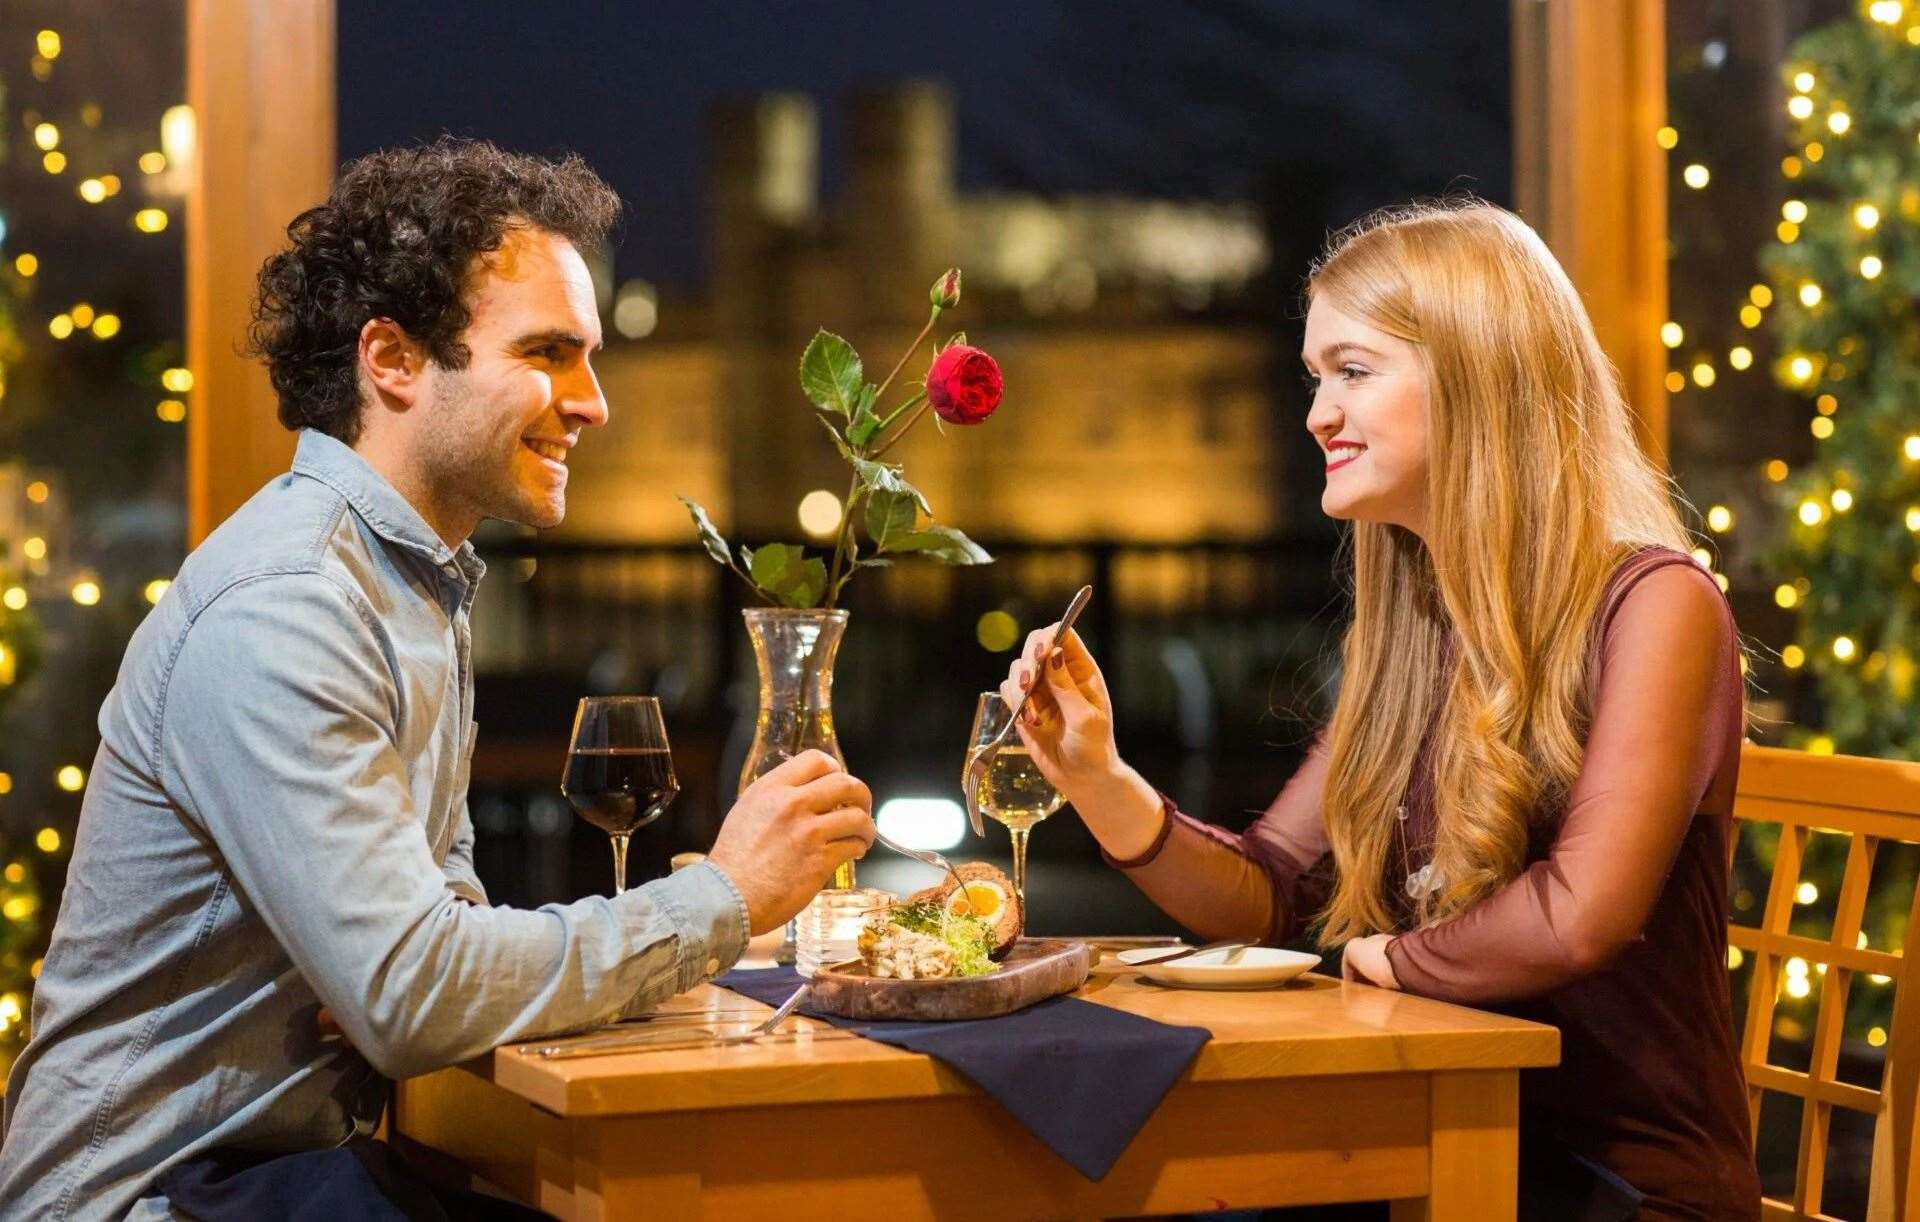 Enjoy a romantic getaway with a tasting menu and wines at the historic Leeds Castle this Valentine’s Day. Picture: Leeds Castle